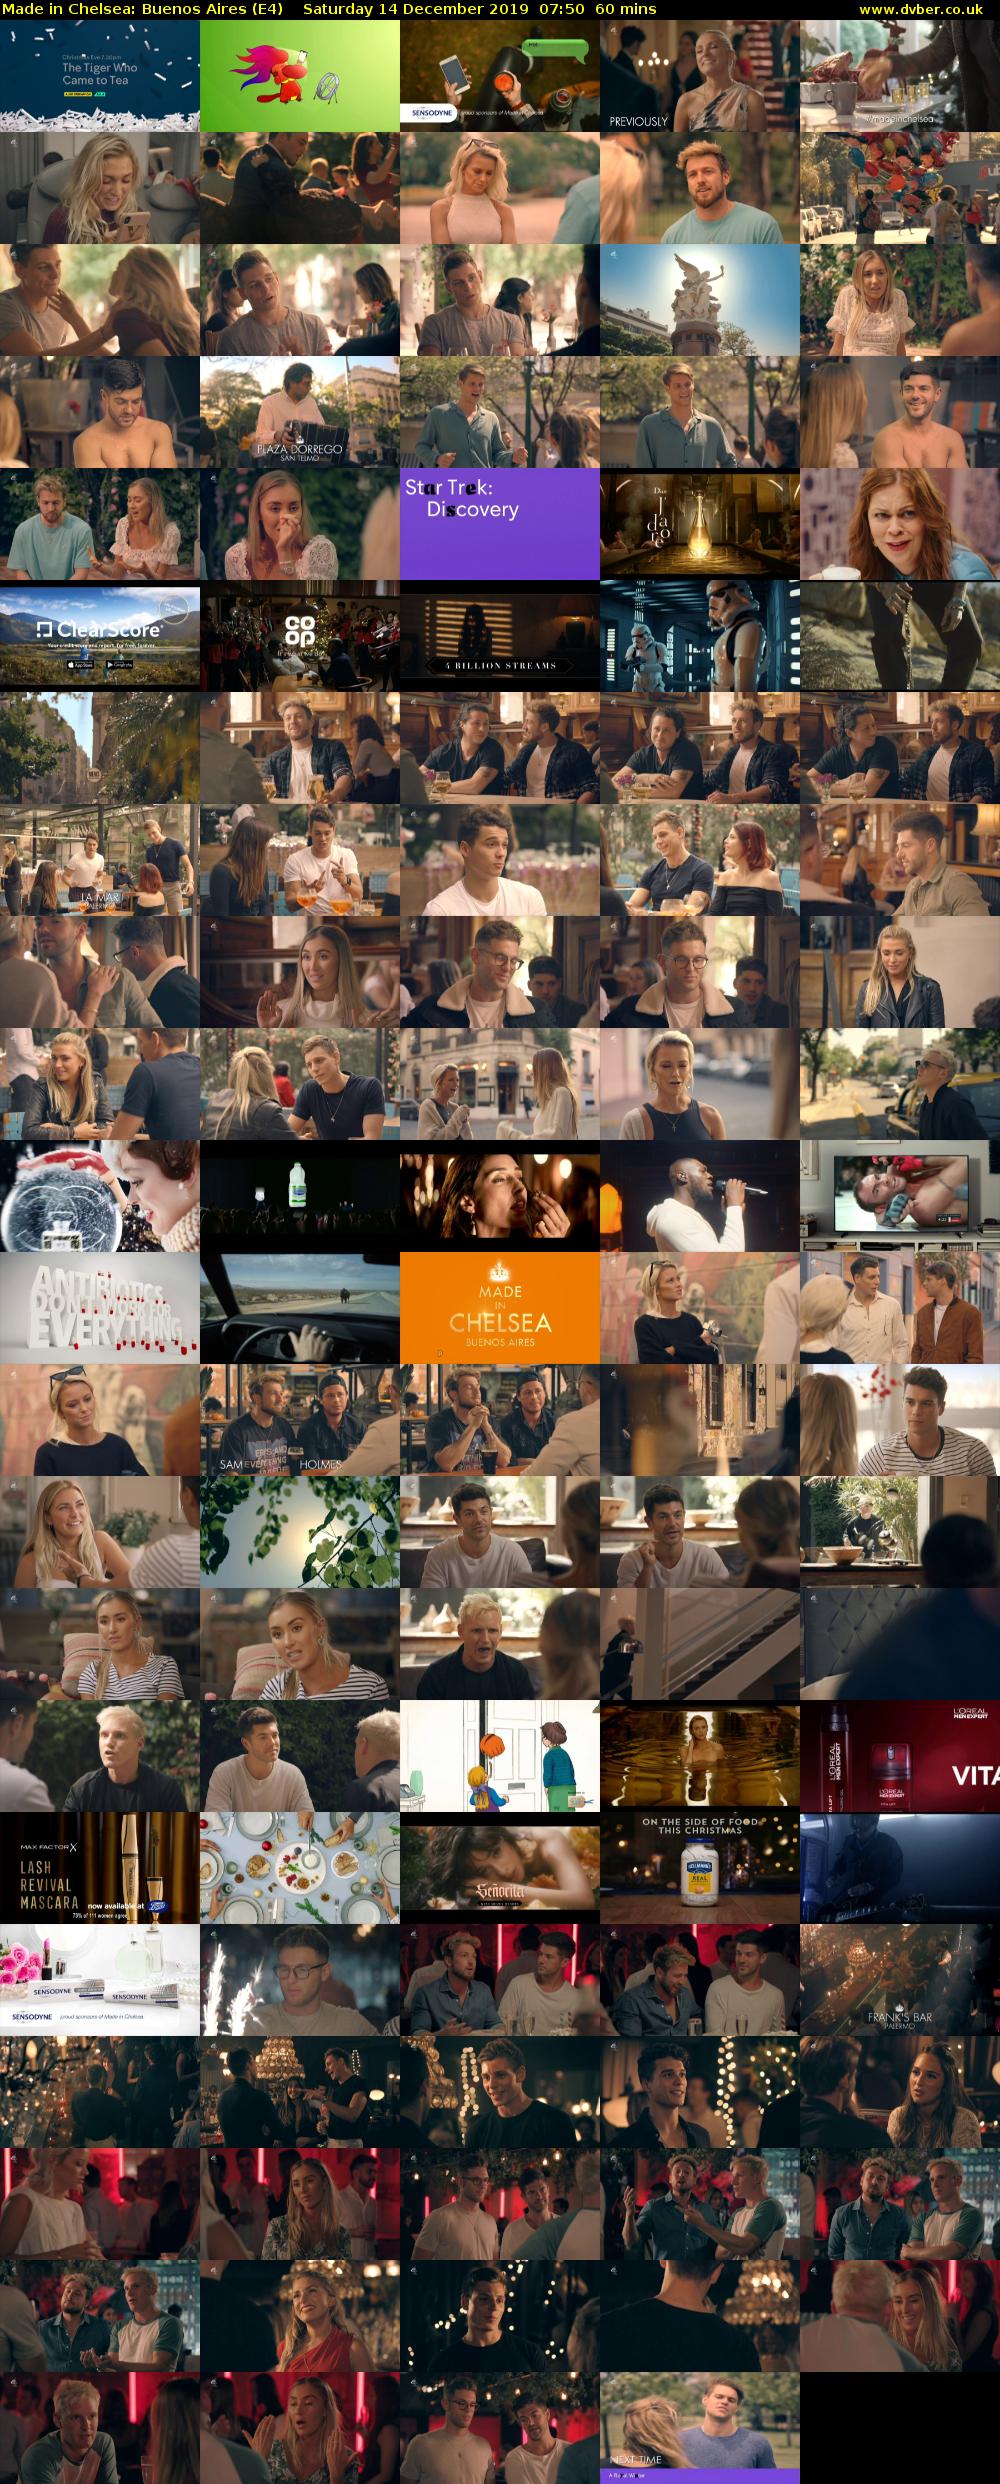 Made in Chelsea: Buenos Aires (E4) Saturday 14 December 2019 07:50 - 08:50